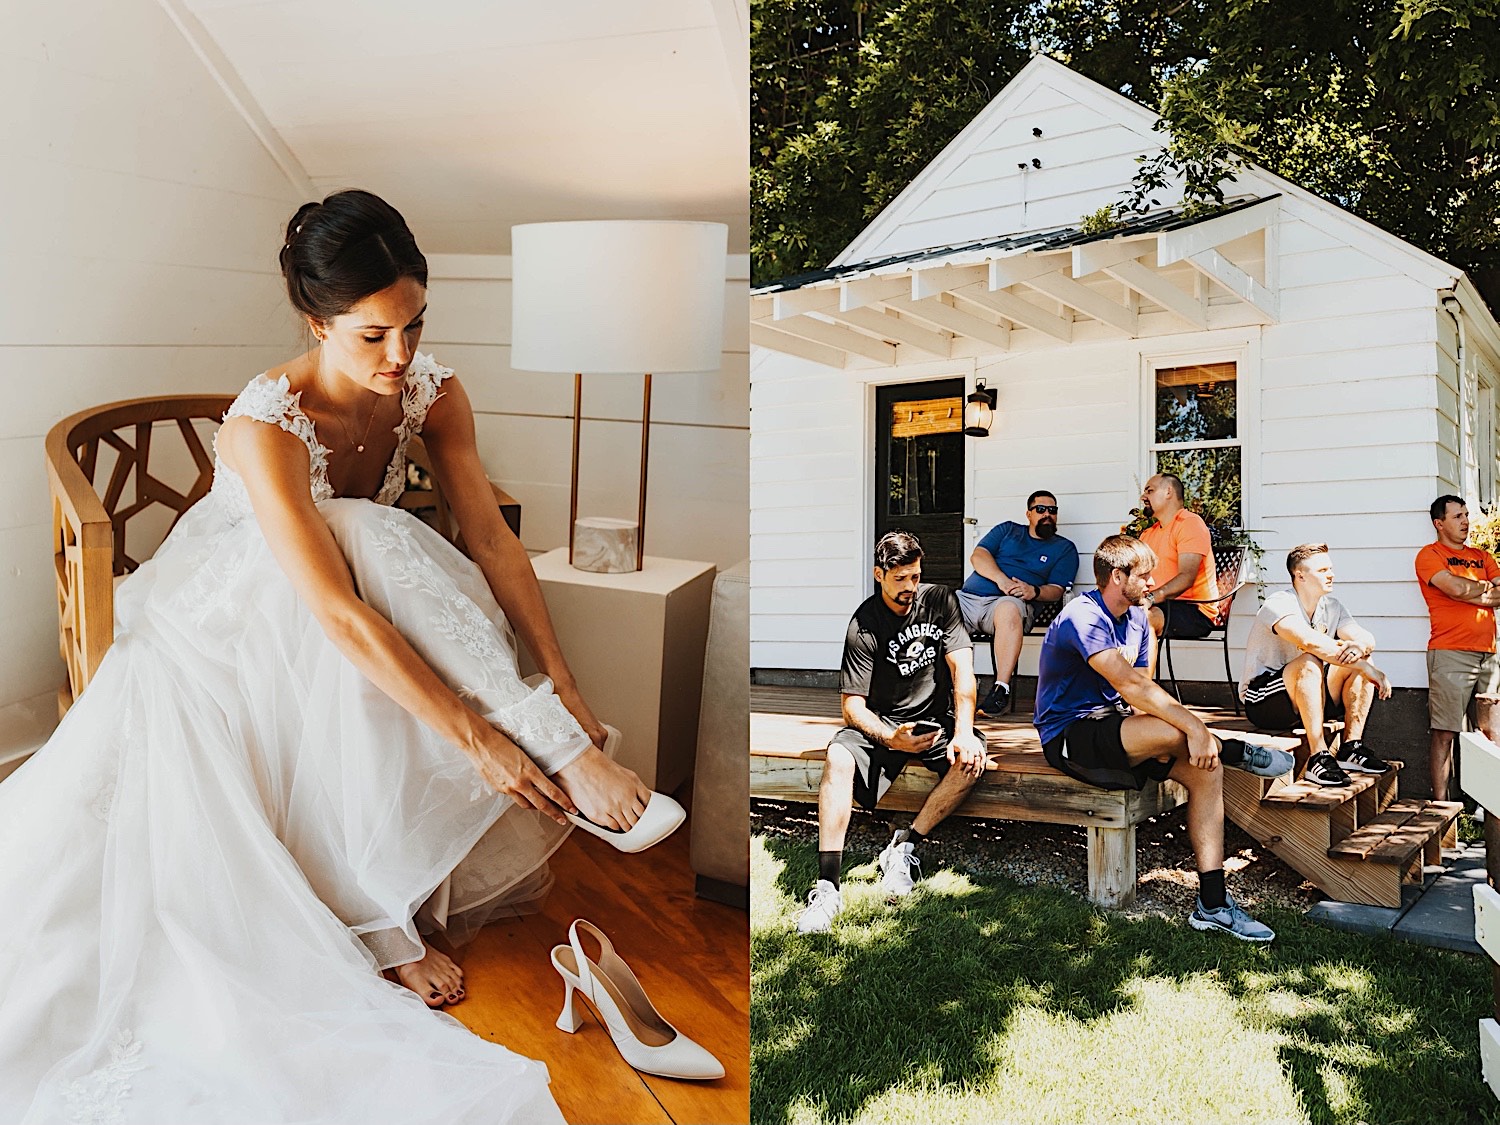 2 photos side by side, the left is of a bride sitting down while putting on her shoes, the right is of the groom and groomsmen sitting outside of a house and hanging out prior to getting ready for the wedding